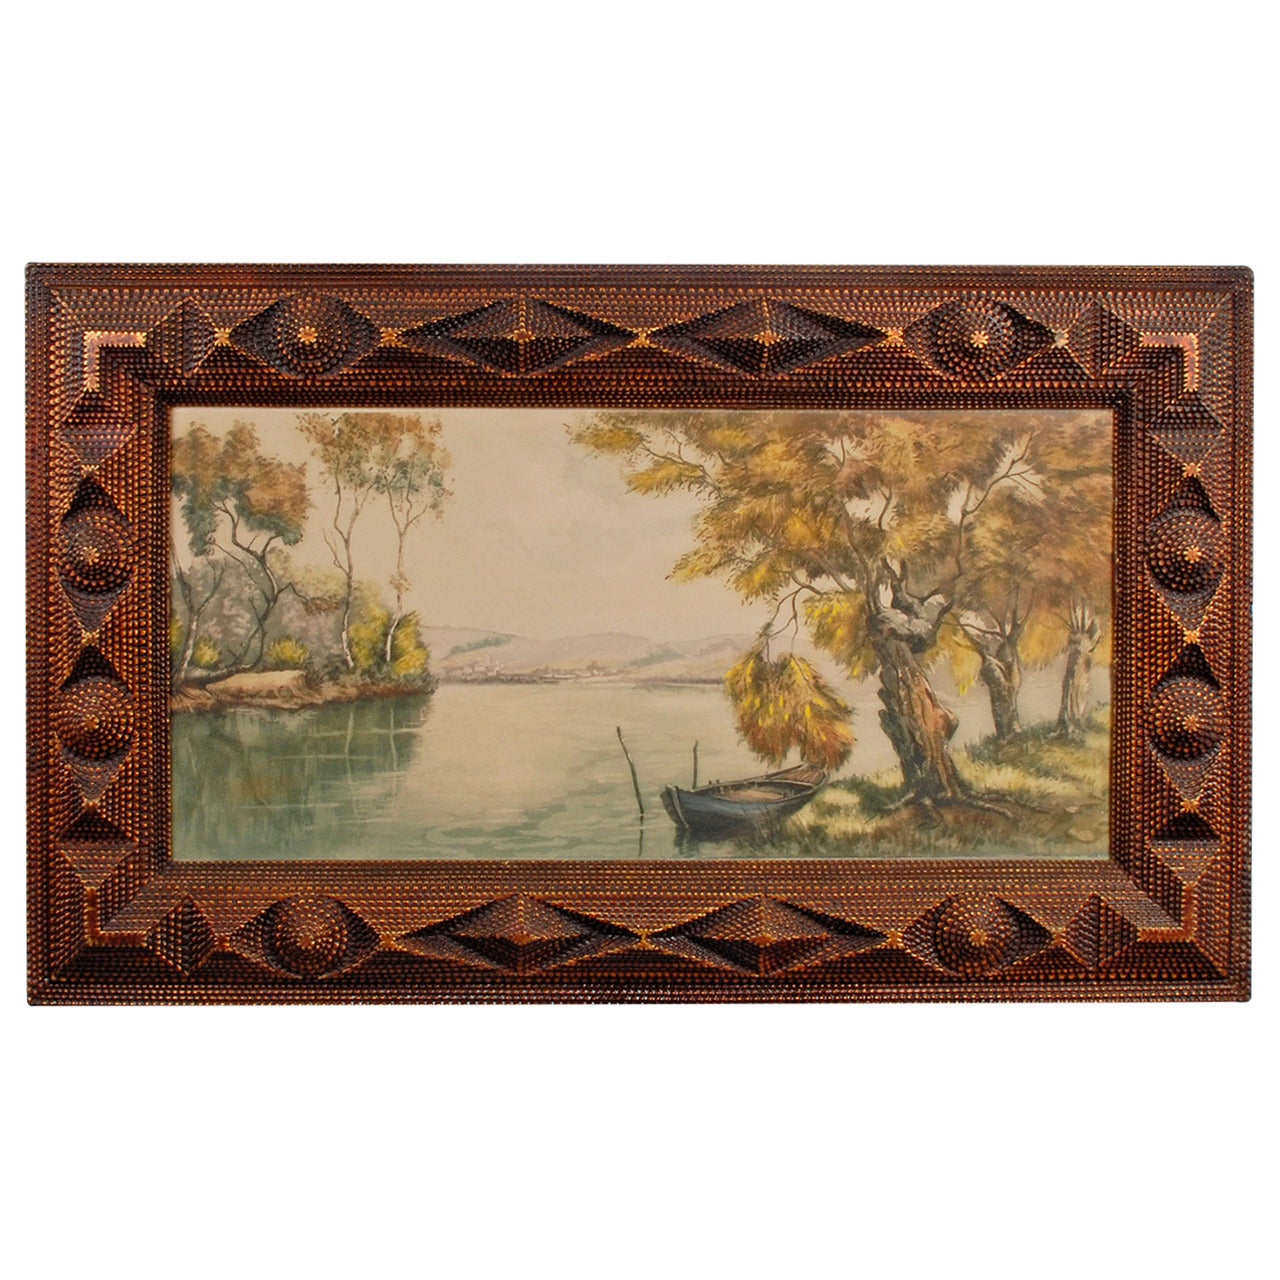 Painted Tramp Art Frame with Lush Pastoral Drawing For Sale